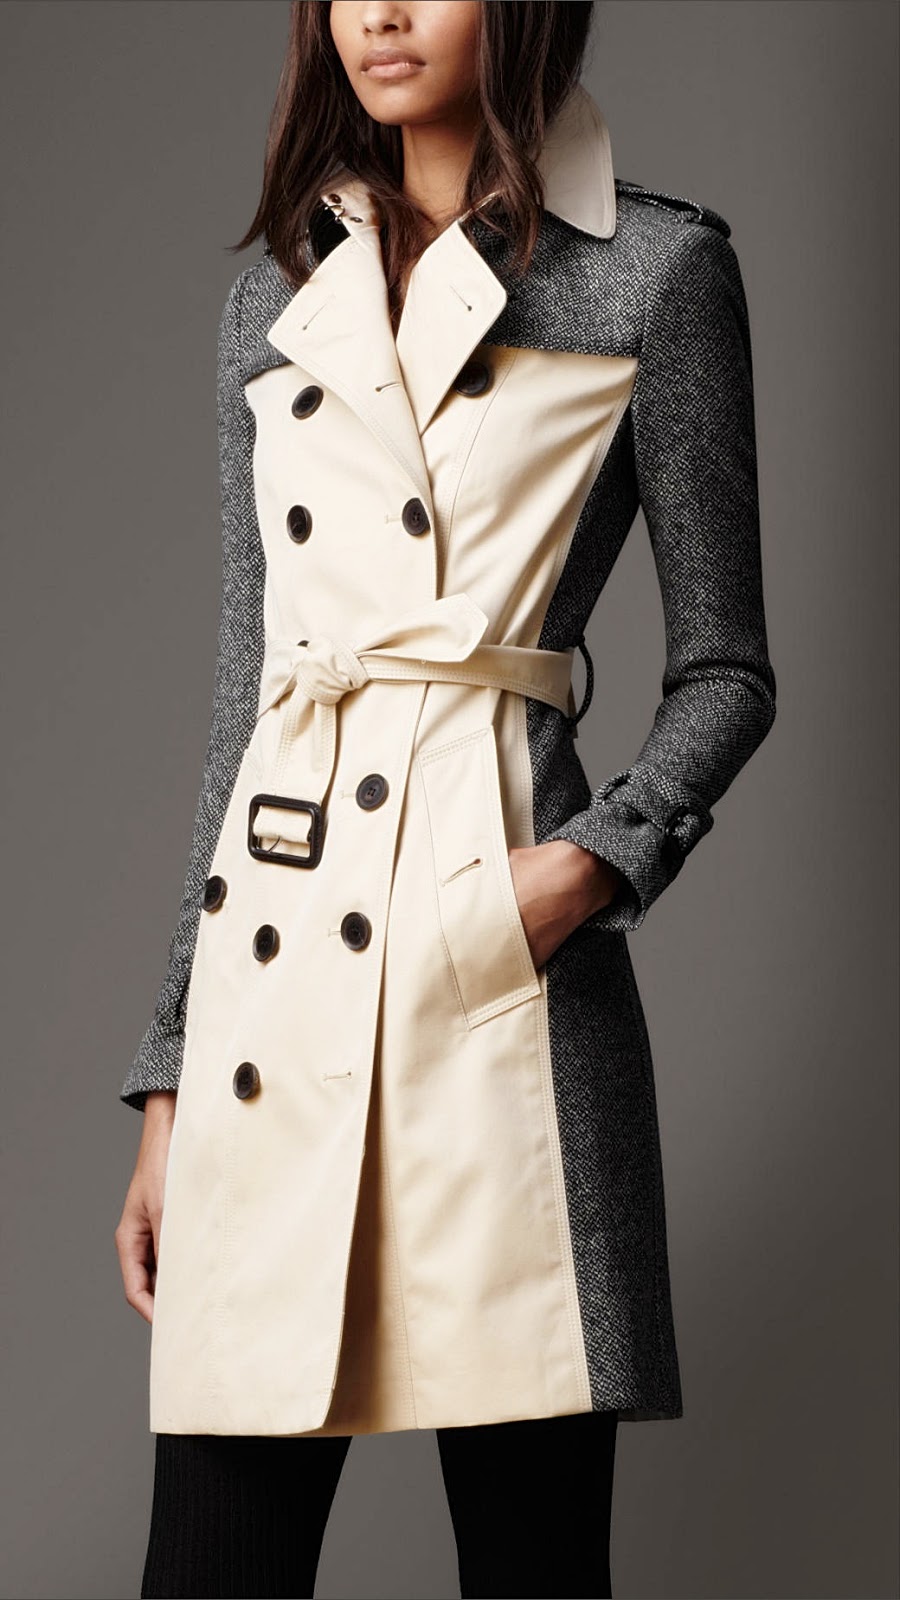 Fashion memior: Collection Of Long Trench Coats.